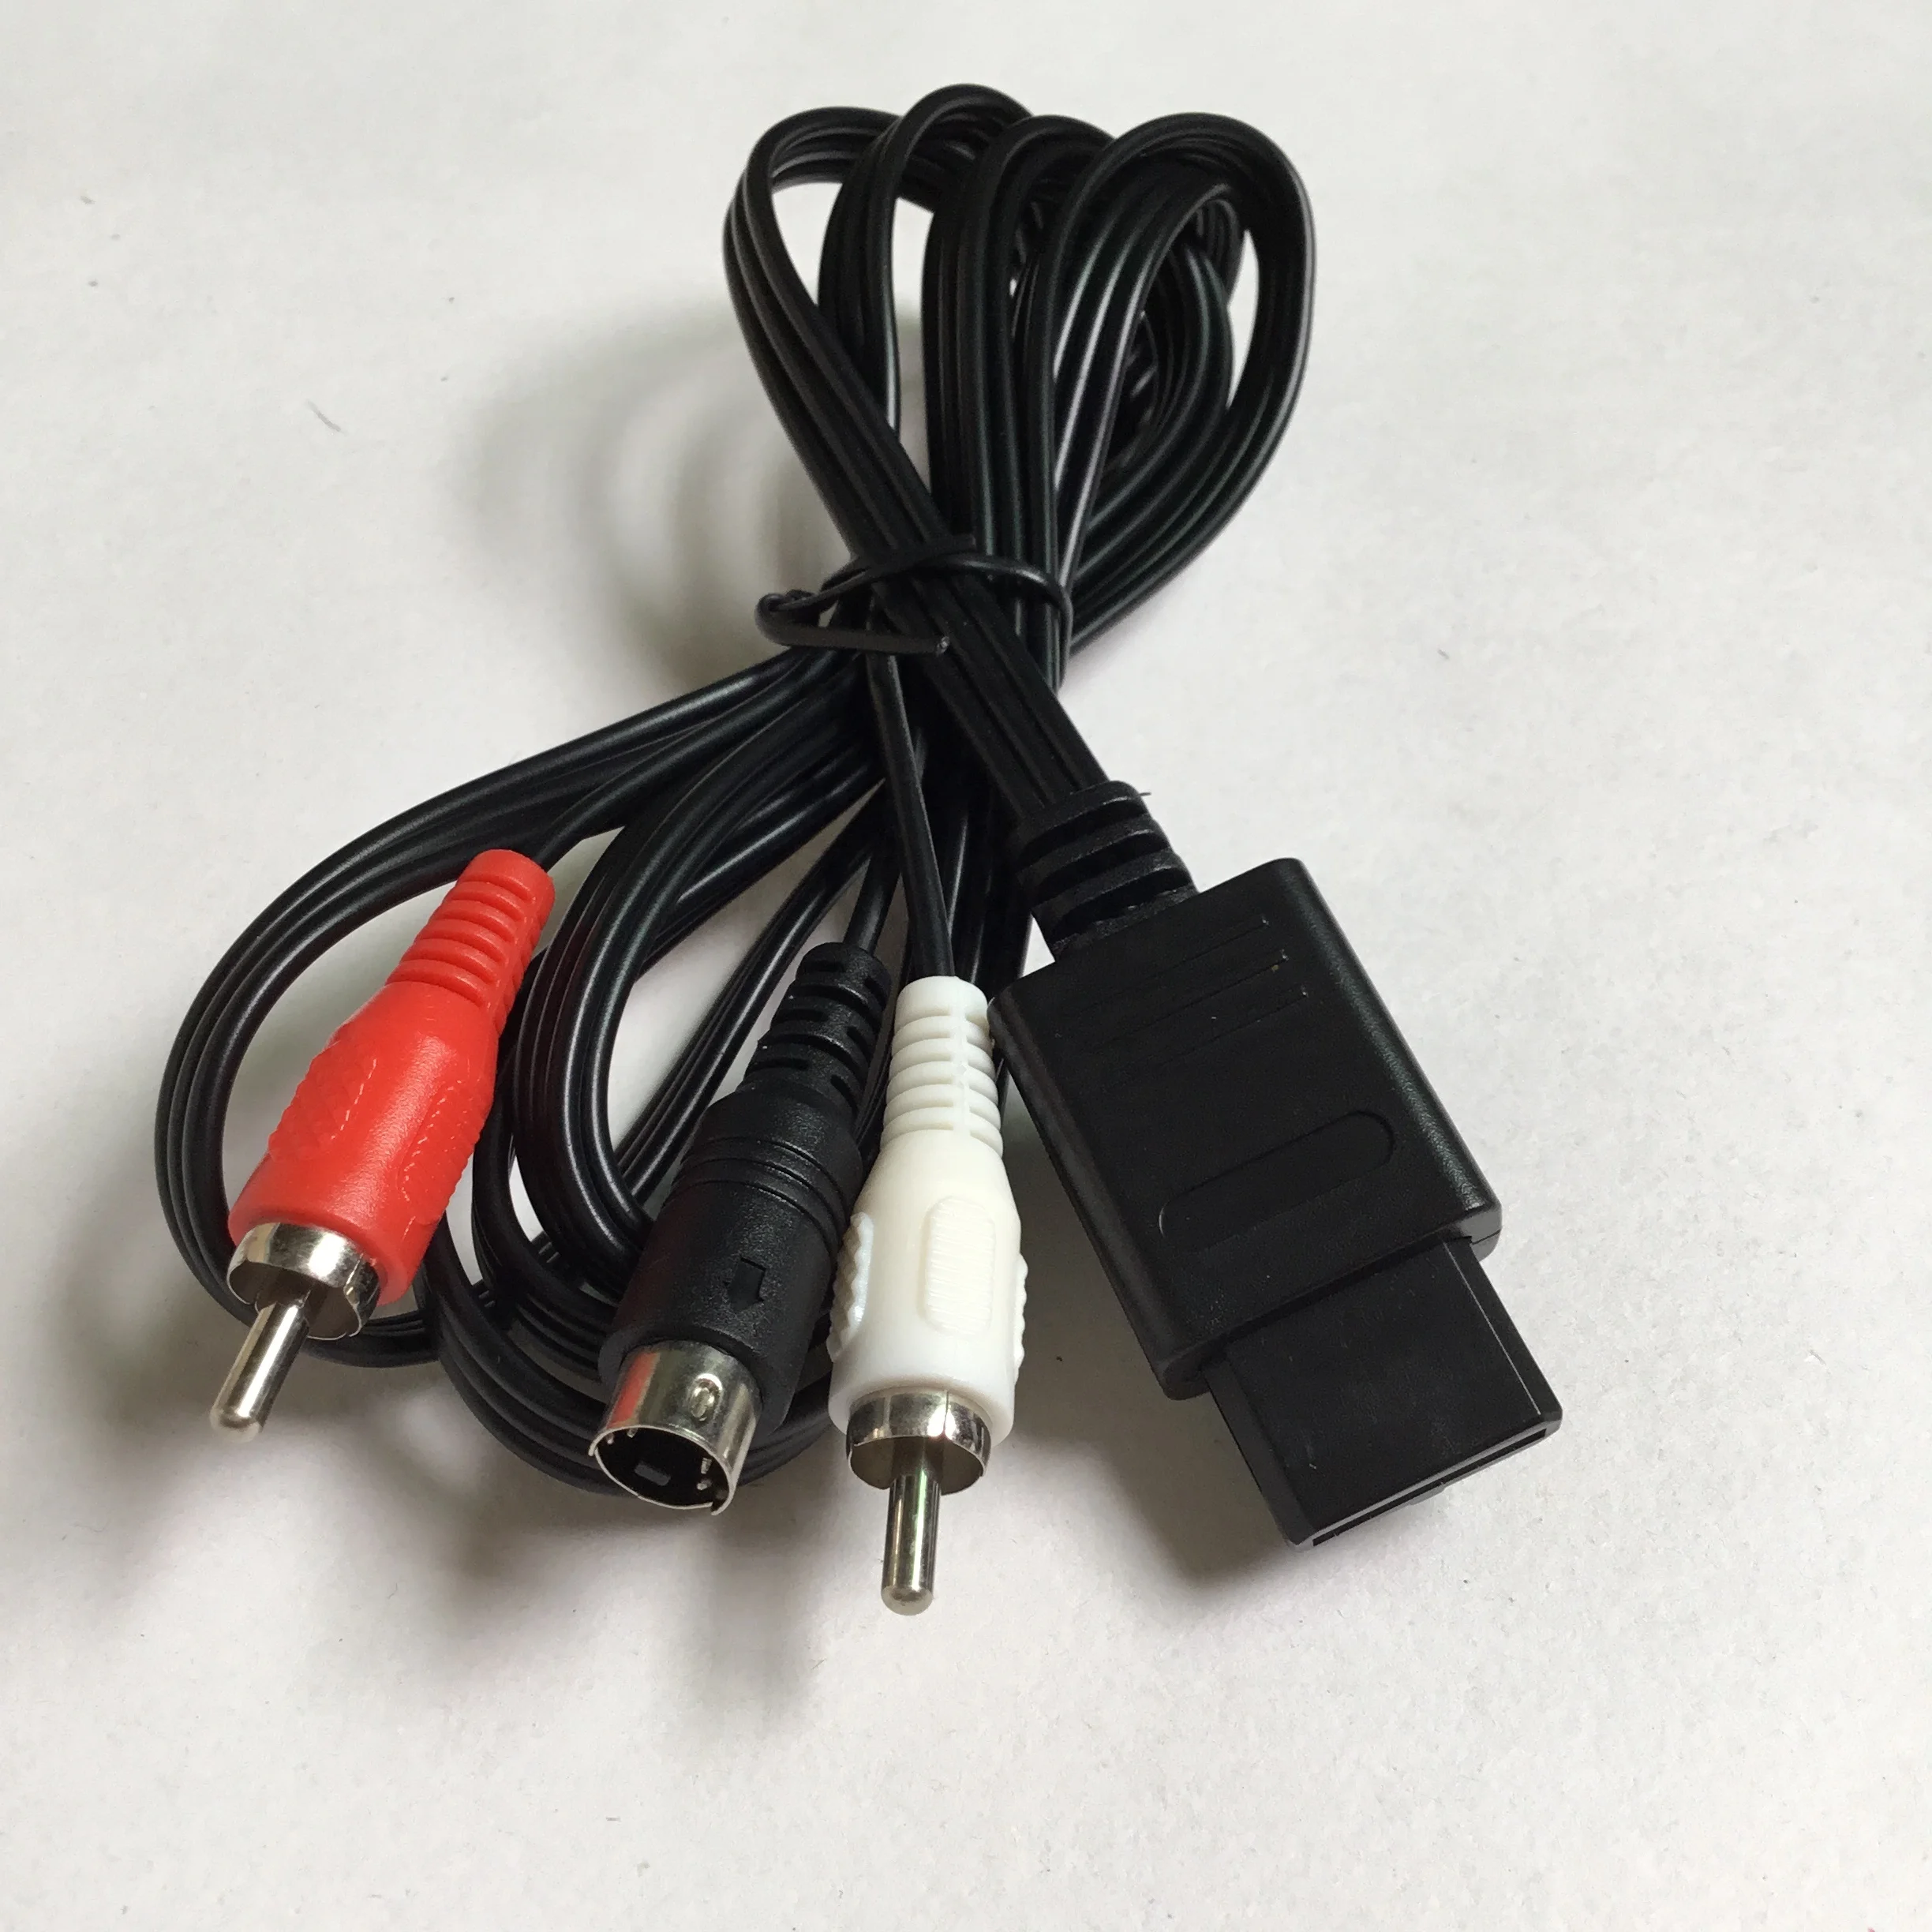 gamecube video cable